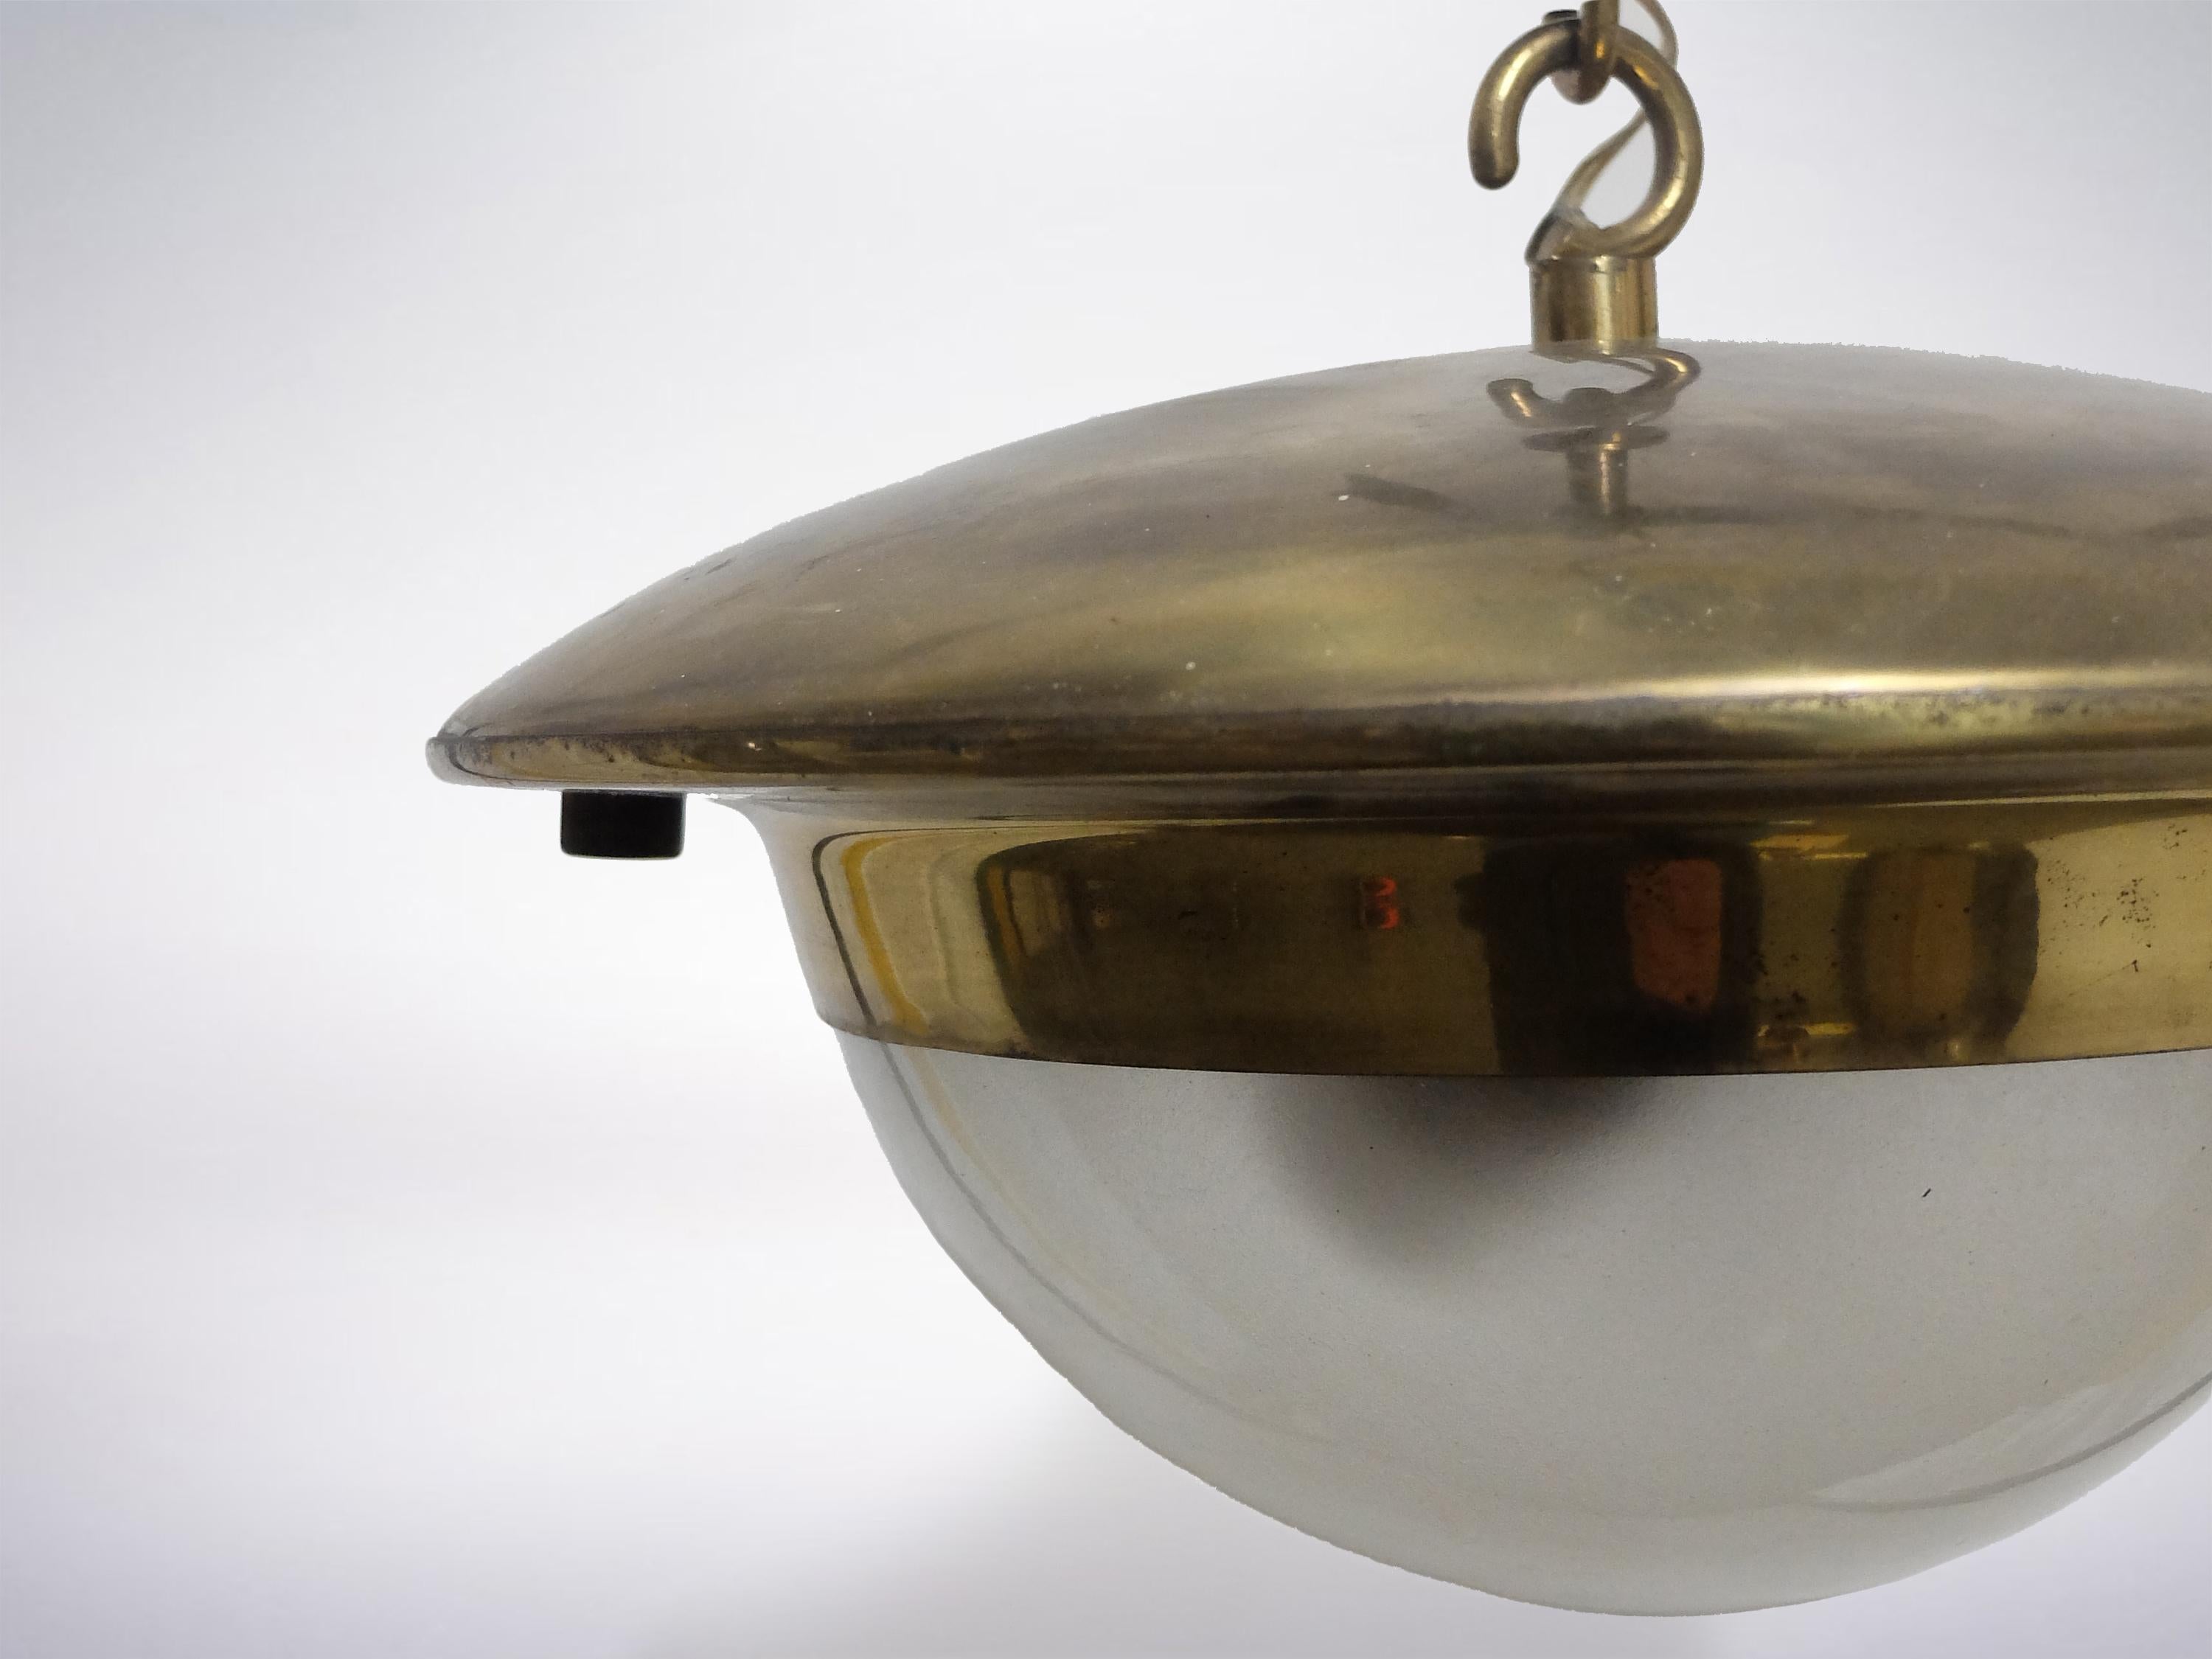 Luigi Caccia Dominioni brass lamp for Azucena, 1950s

Gigantic large Italian mid century brass pendant lamp with one large glass ball shade.
Designed by Luigi Caccia Dominioni for Azucena.
Beautiful rare design with lots of details. Made in